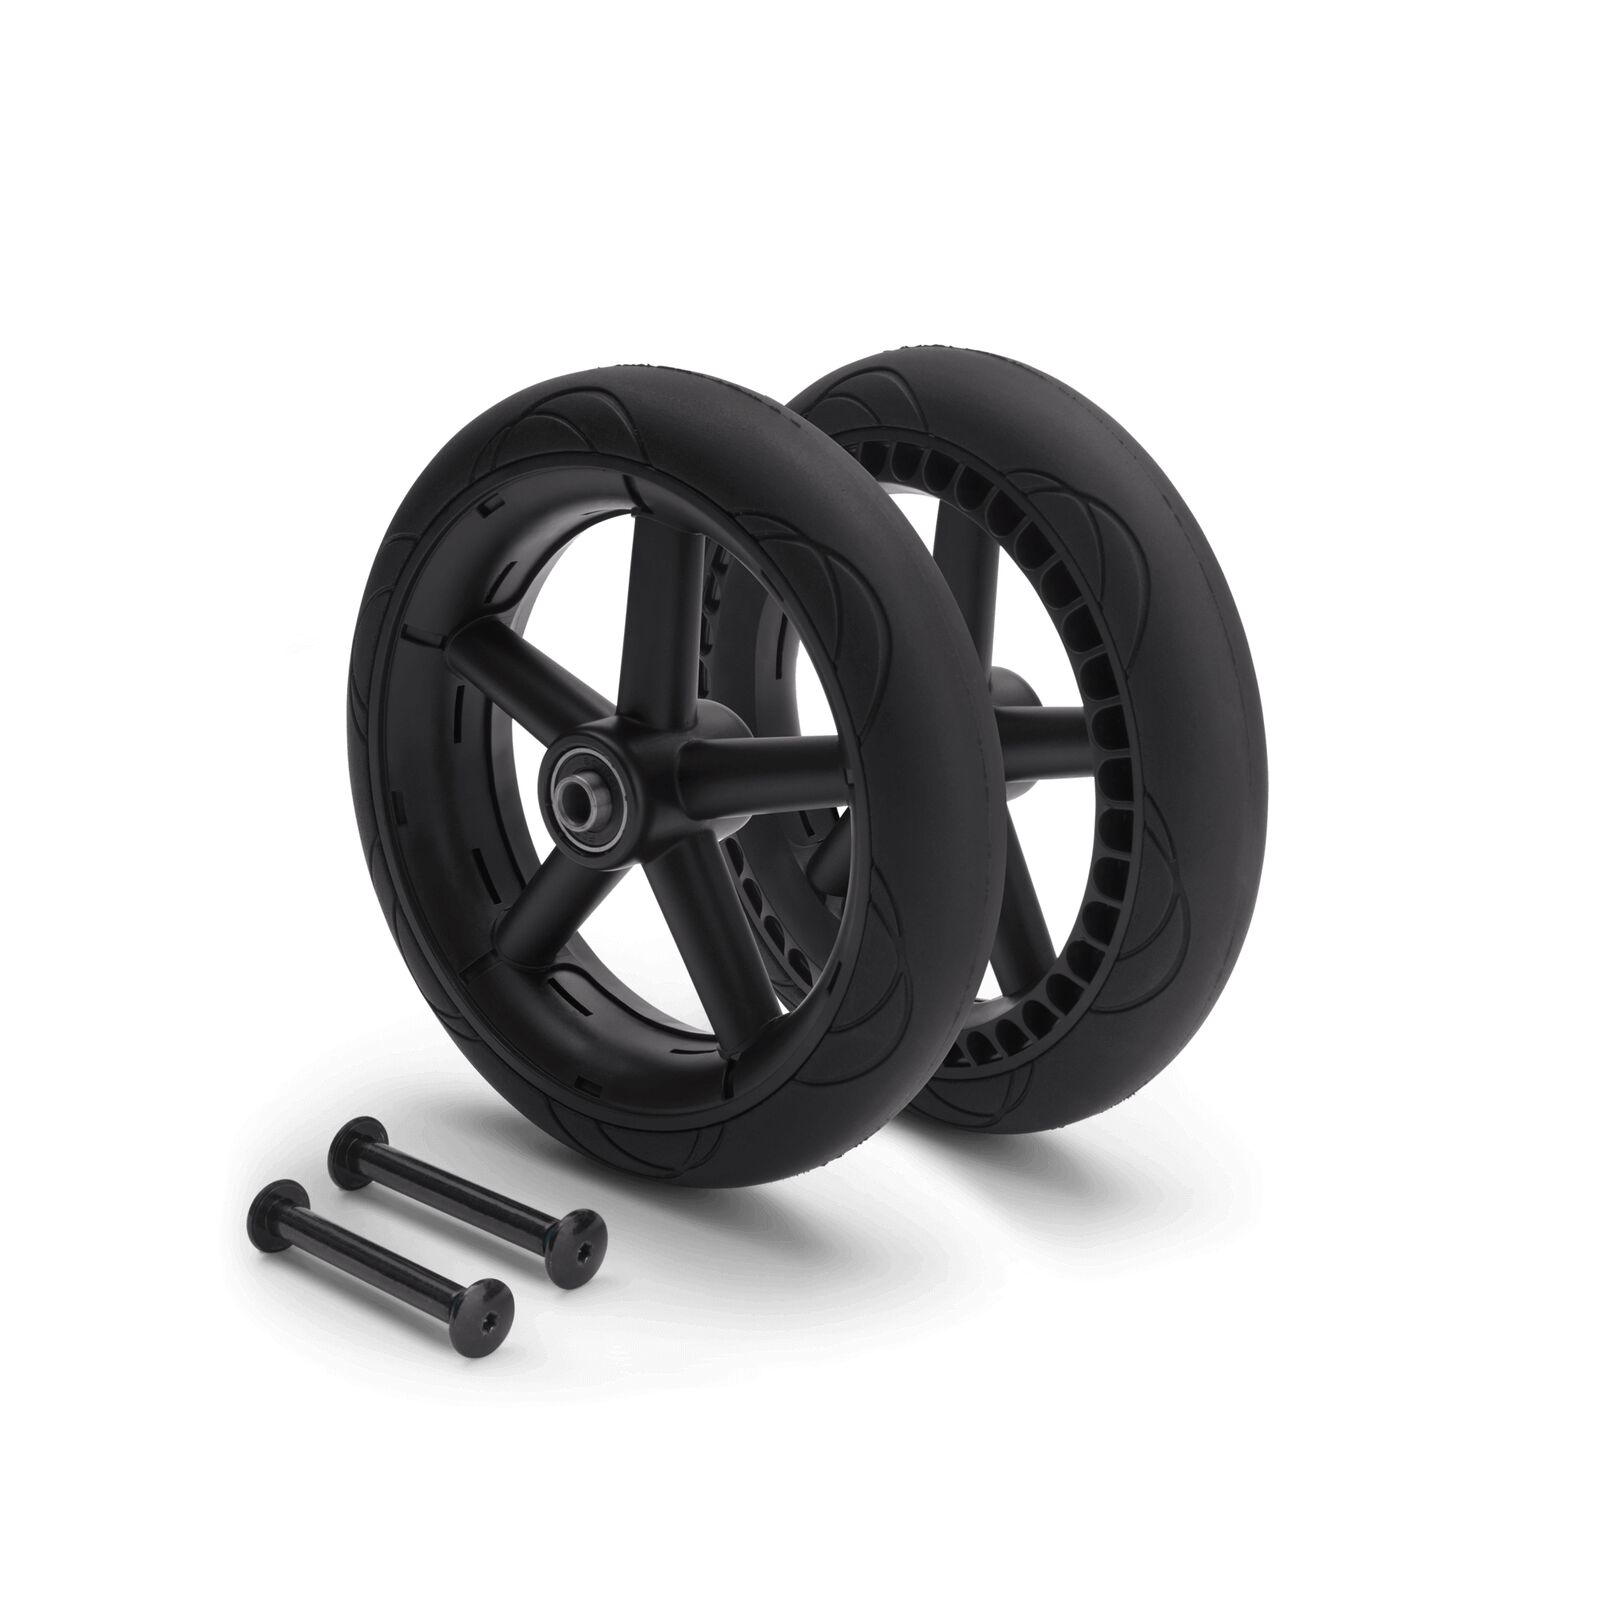 Bugaboo Bee 6 rear wheels replacement set - View 1